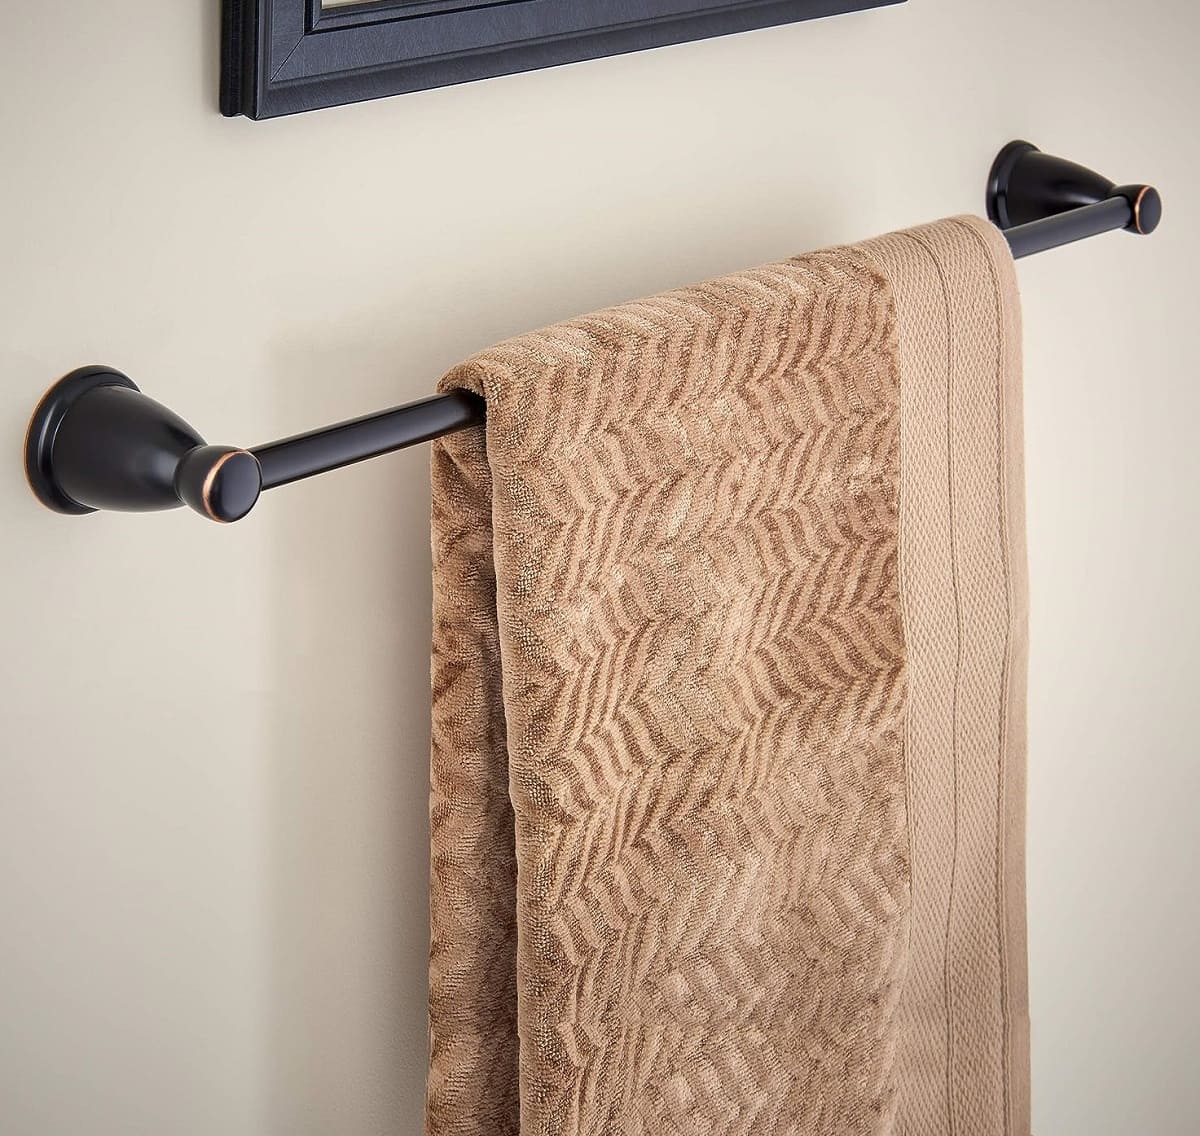 How To Clean Oil Rubbed Bronze Towel Bar